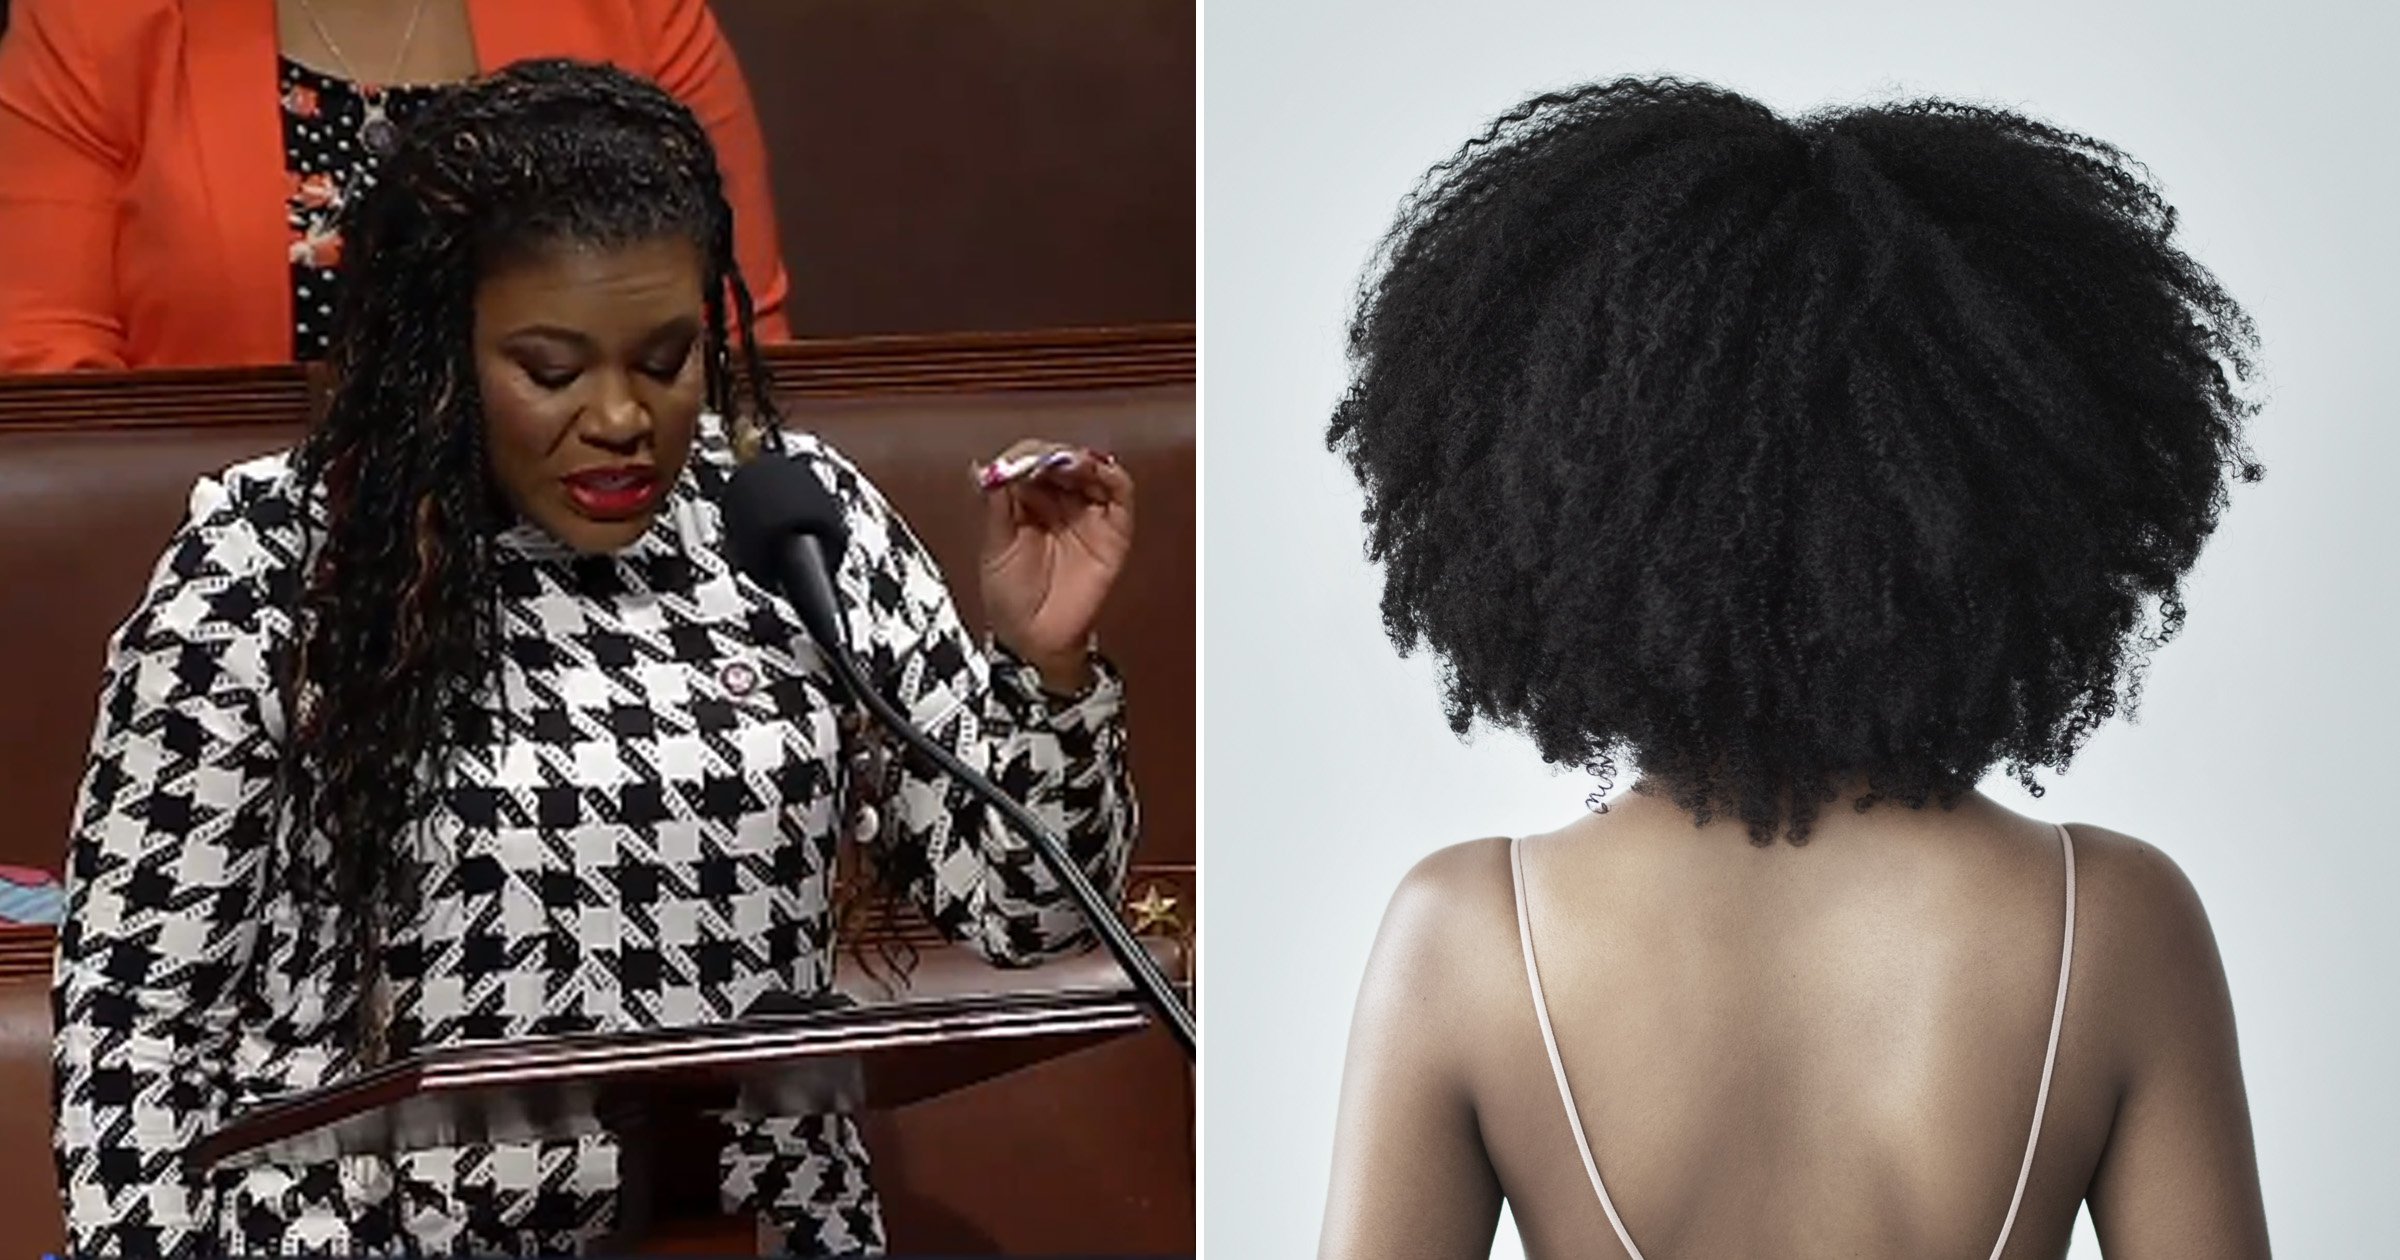 The House on Friday passed a bill that would ban discrimination against someone based on the texture or style of their hair 